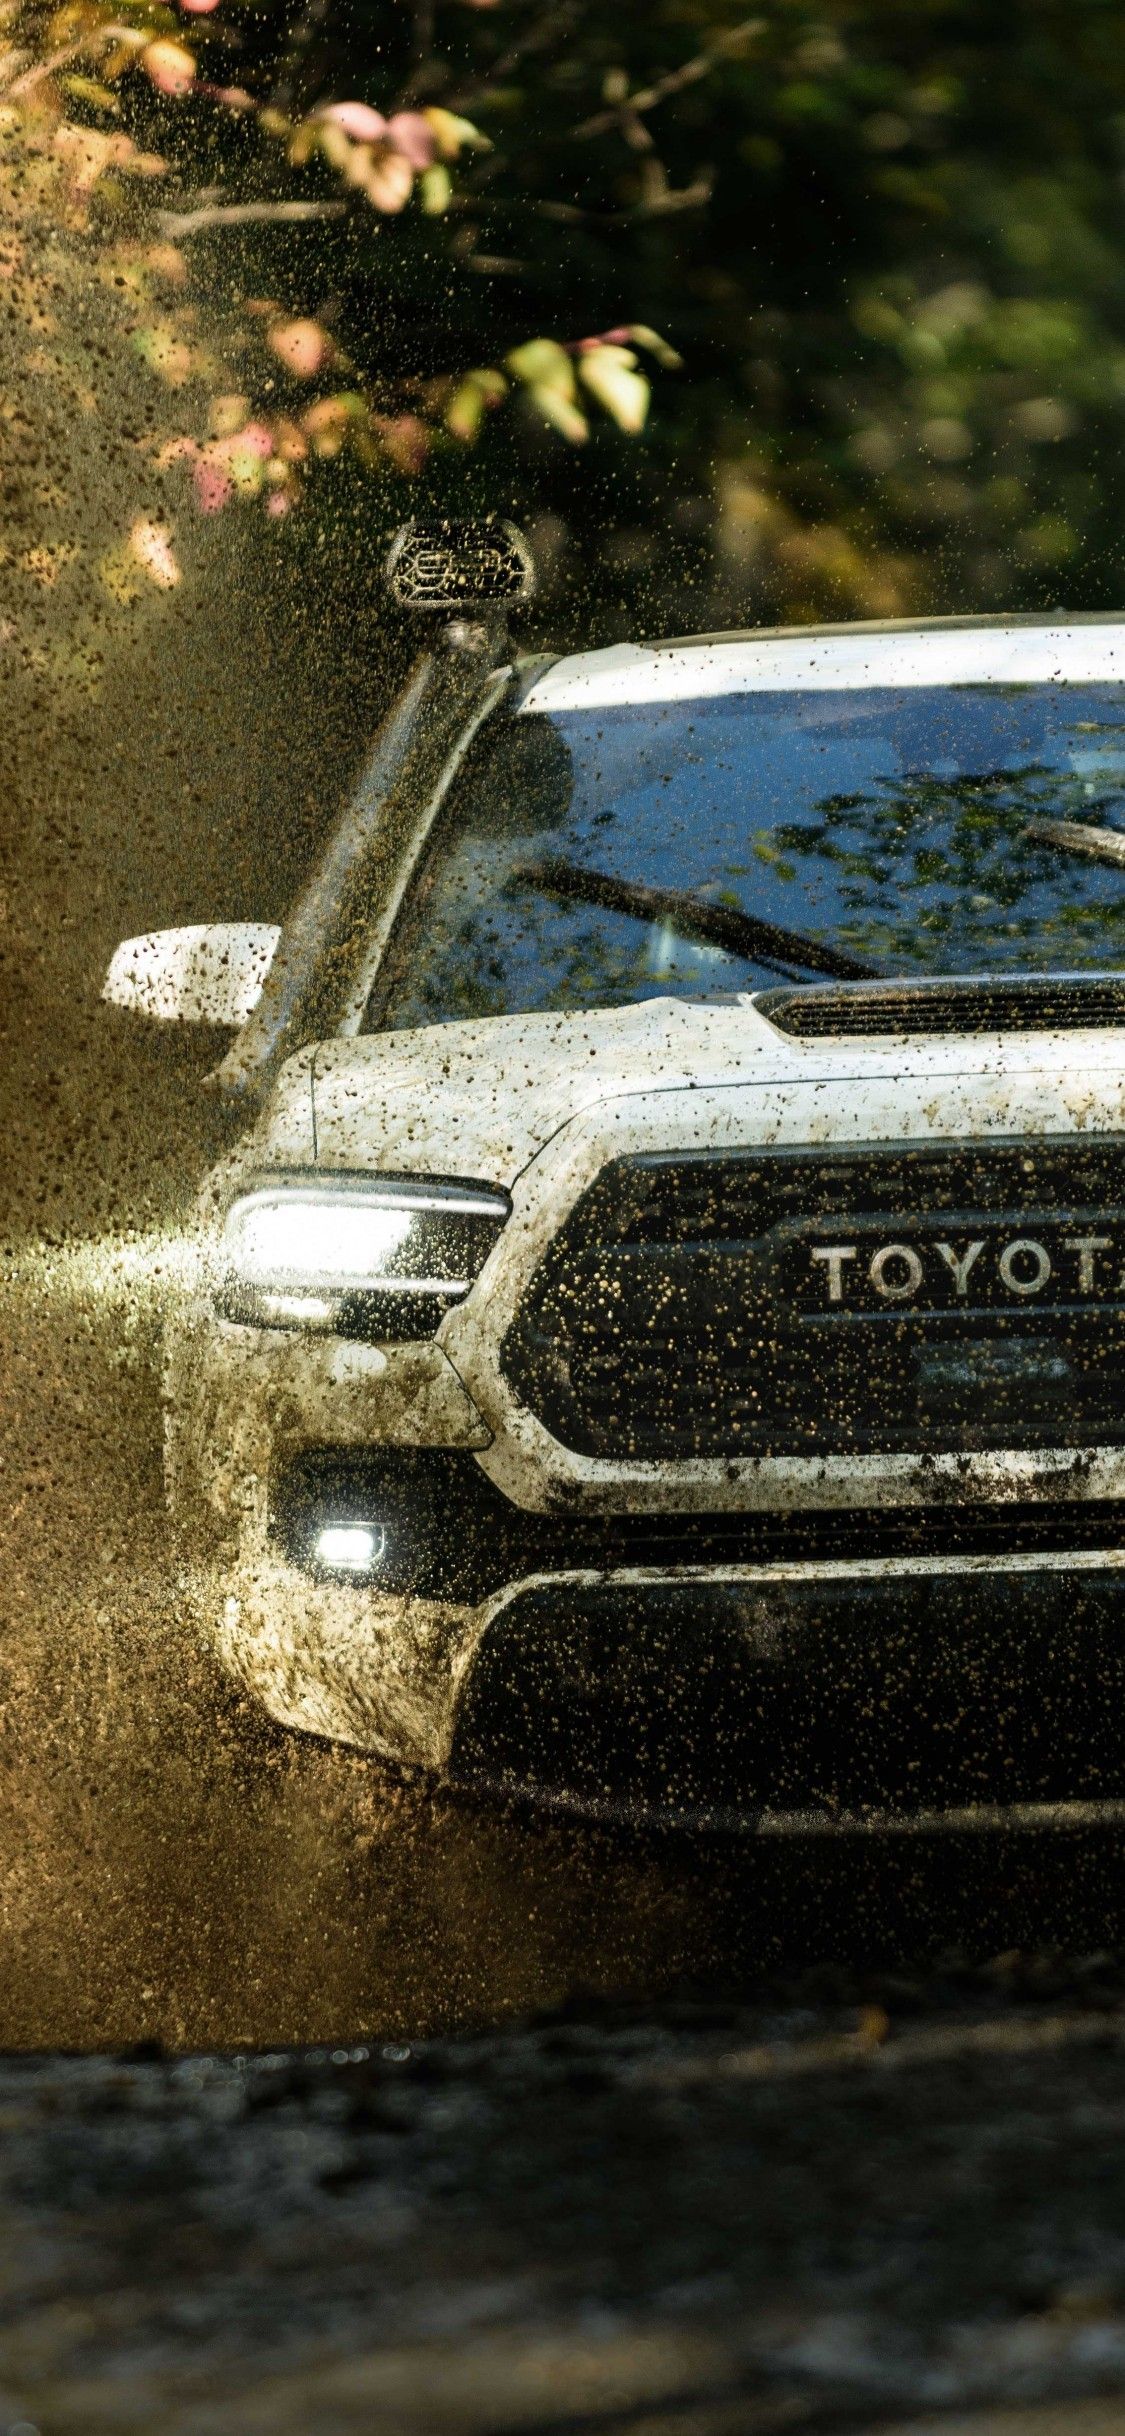 Toyota Iphone Wallpapers Wallpaper Cave